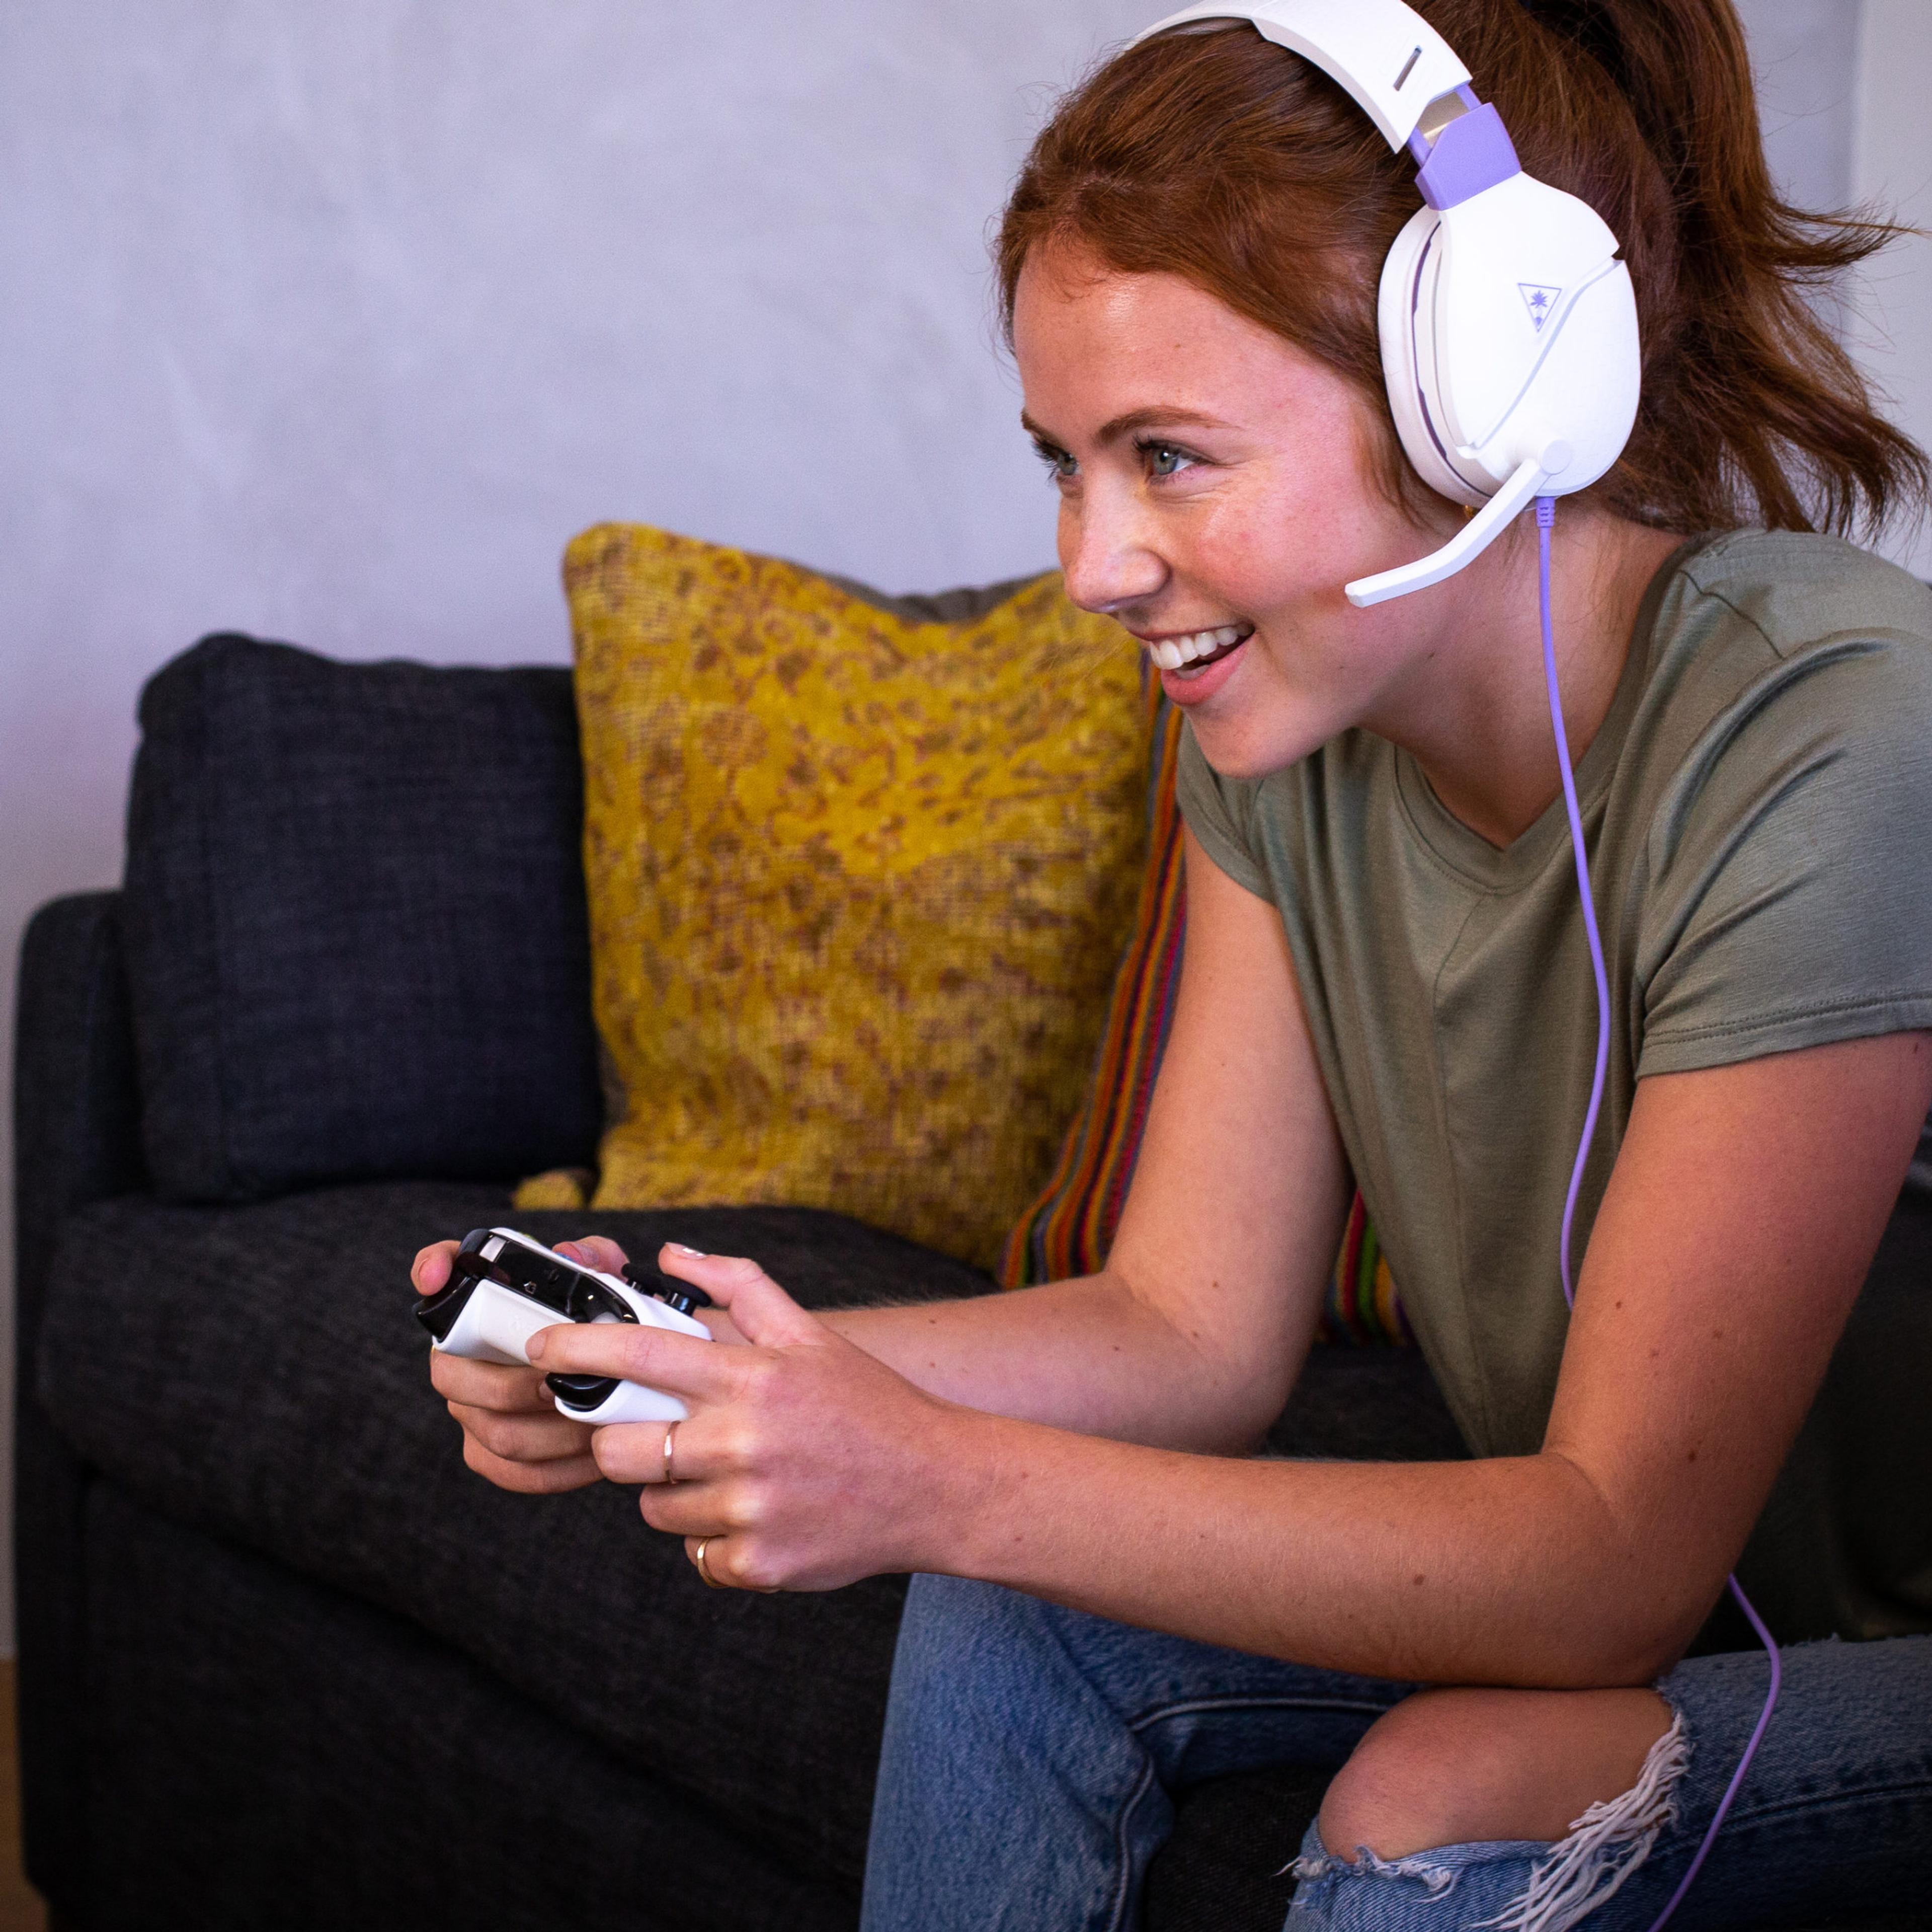 a woman wearing headphones is playing a video game on a couch .